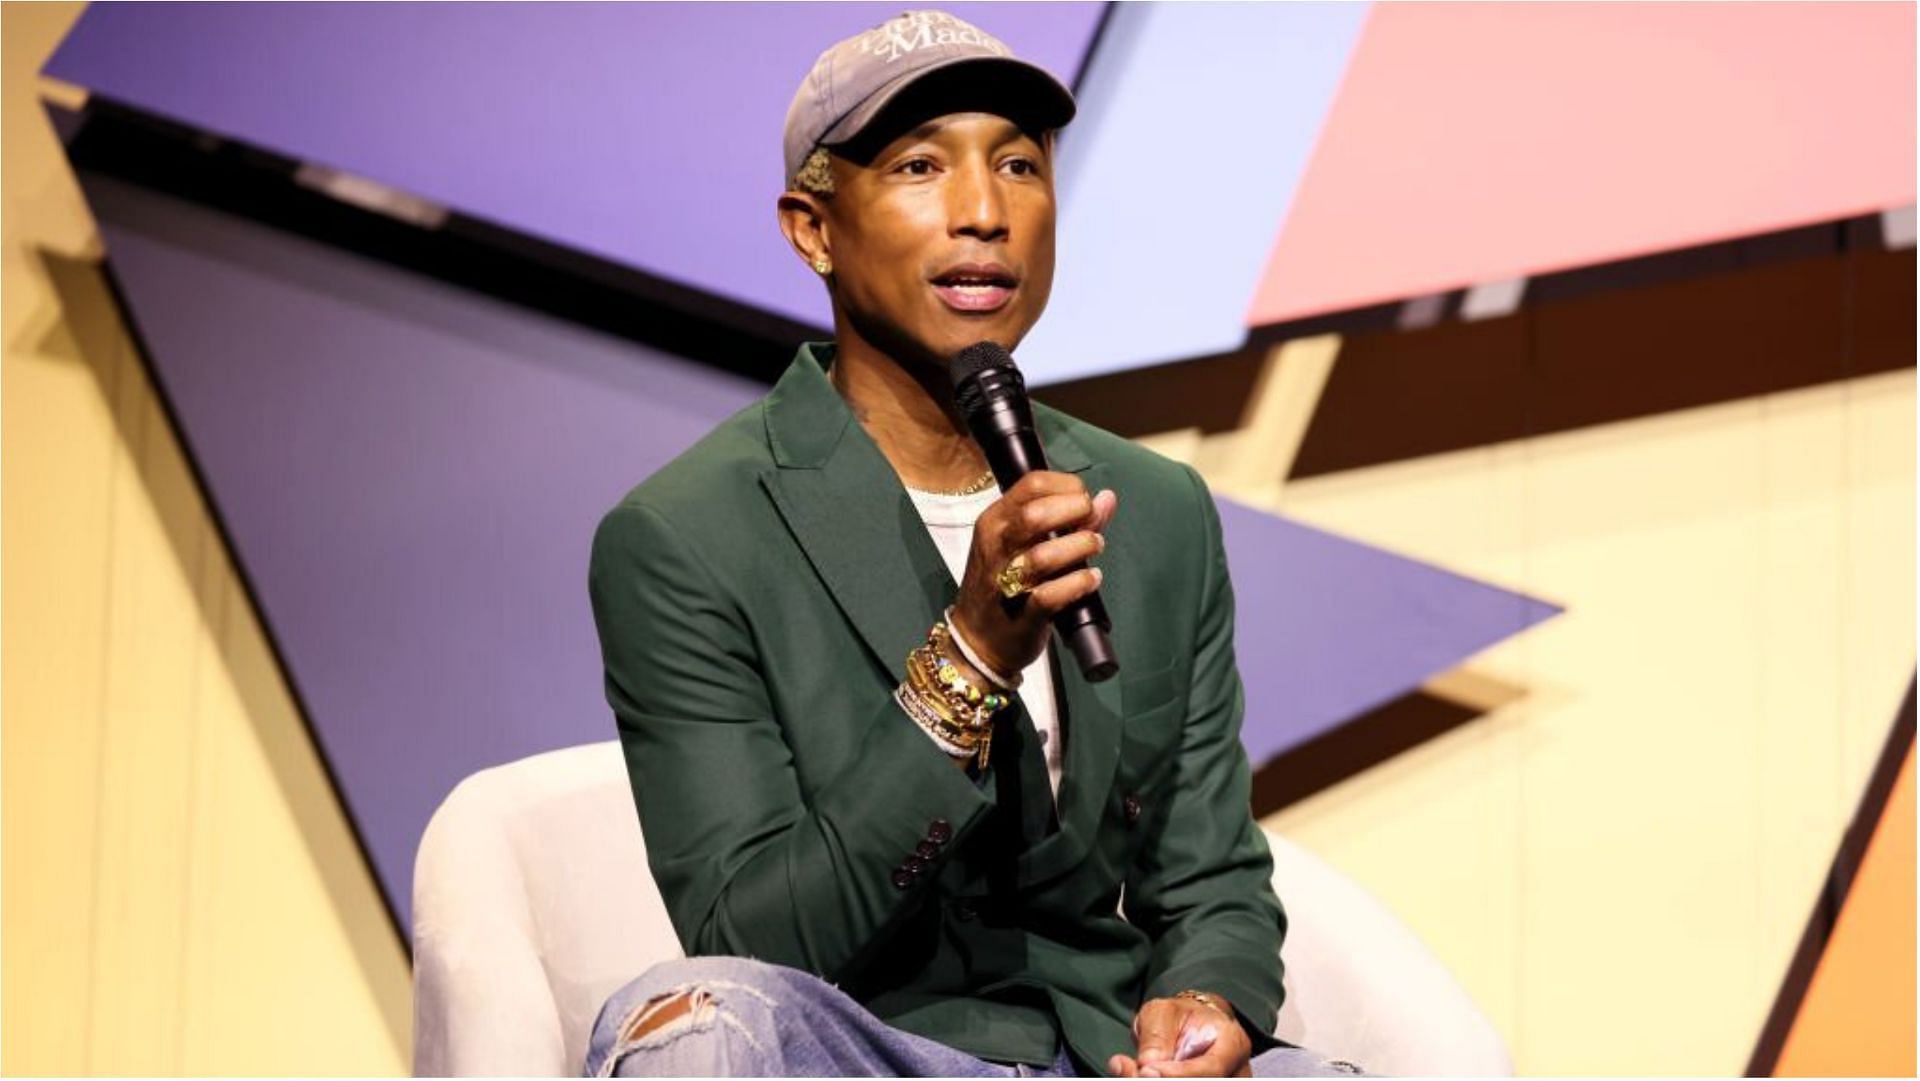 Pharrell Williams has been a part of the fashion industry for a long time (Image via Jemal Countess/Getty Images)